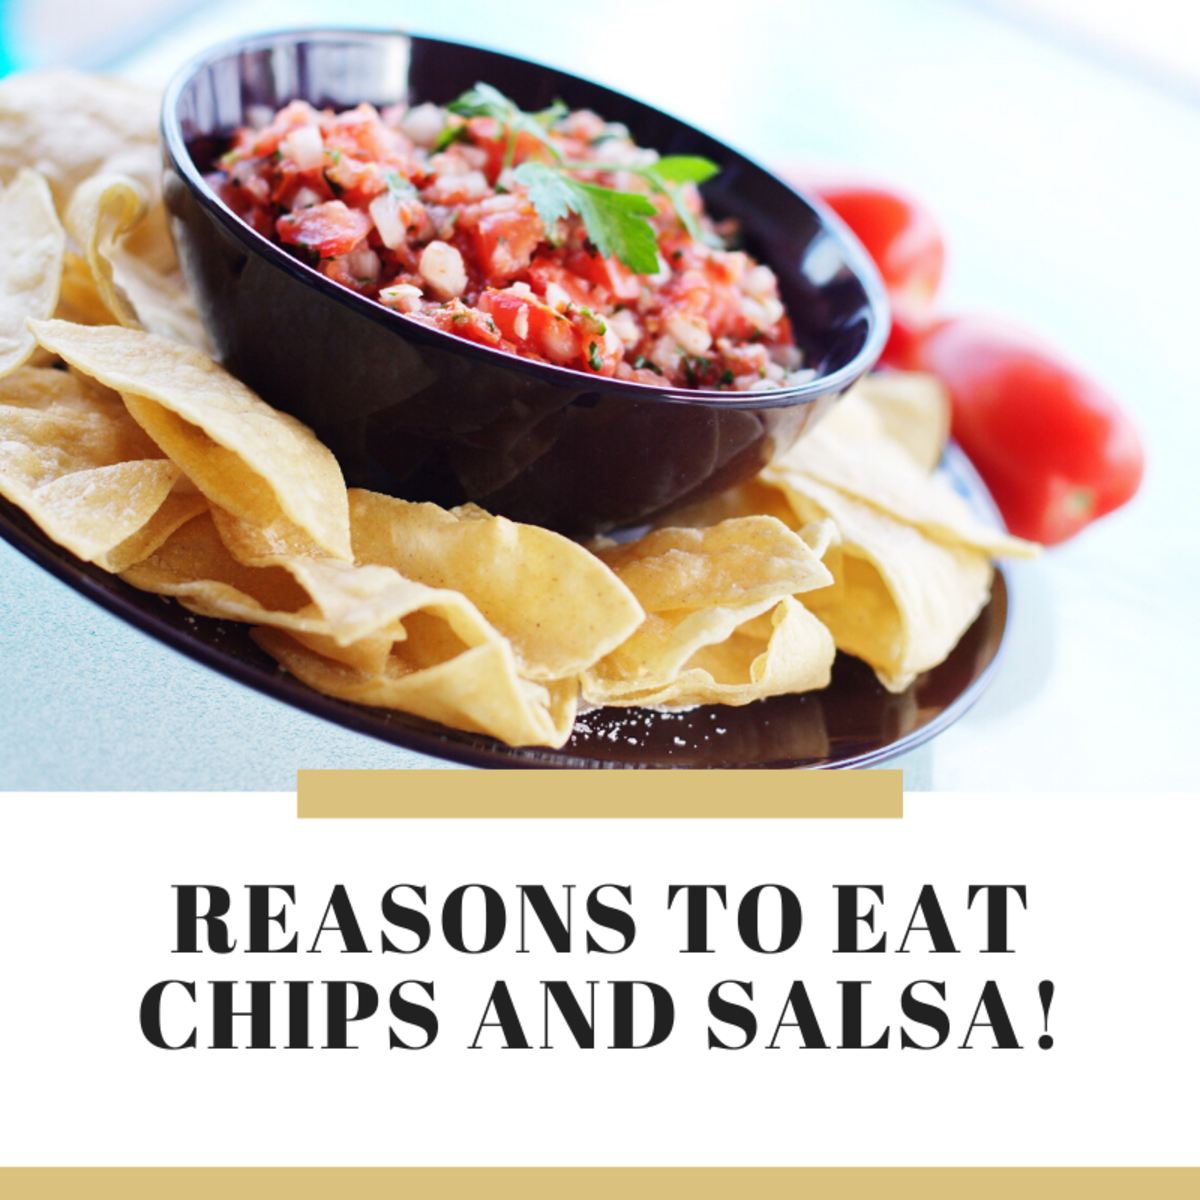 Chips and salsa is a great appetizer that goes well with almost any meal.  